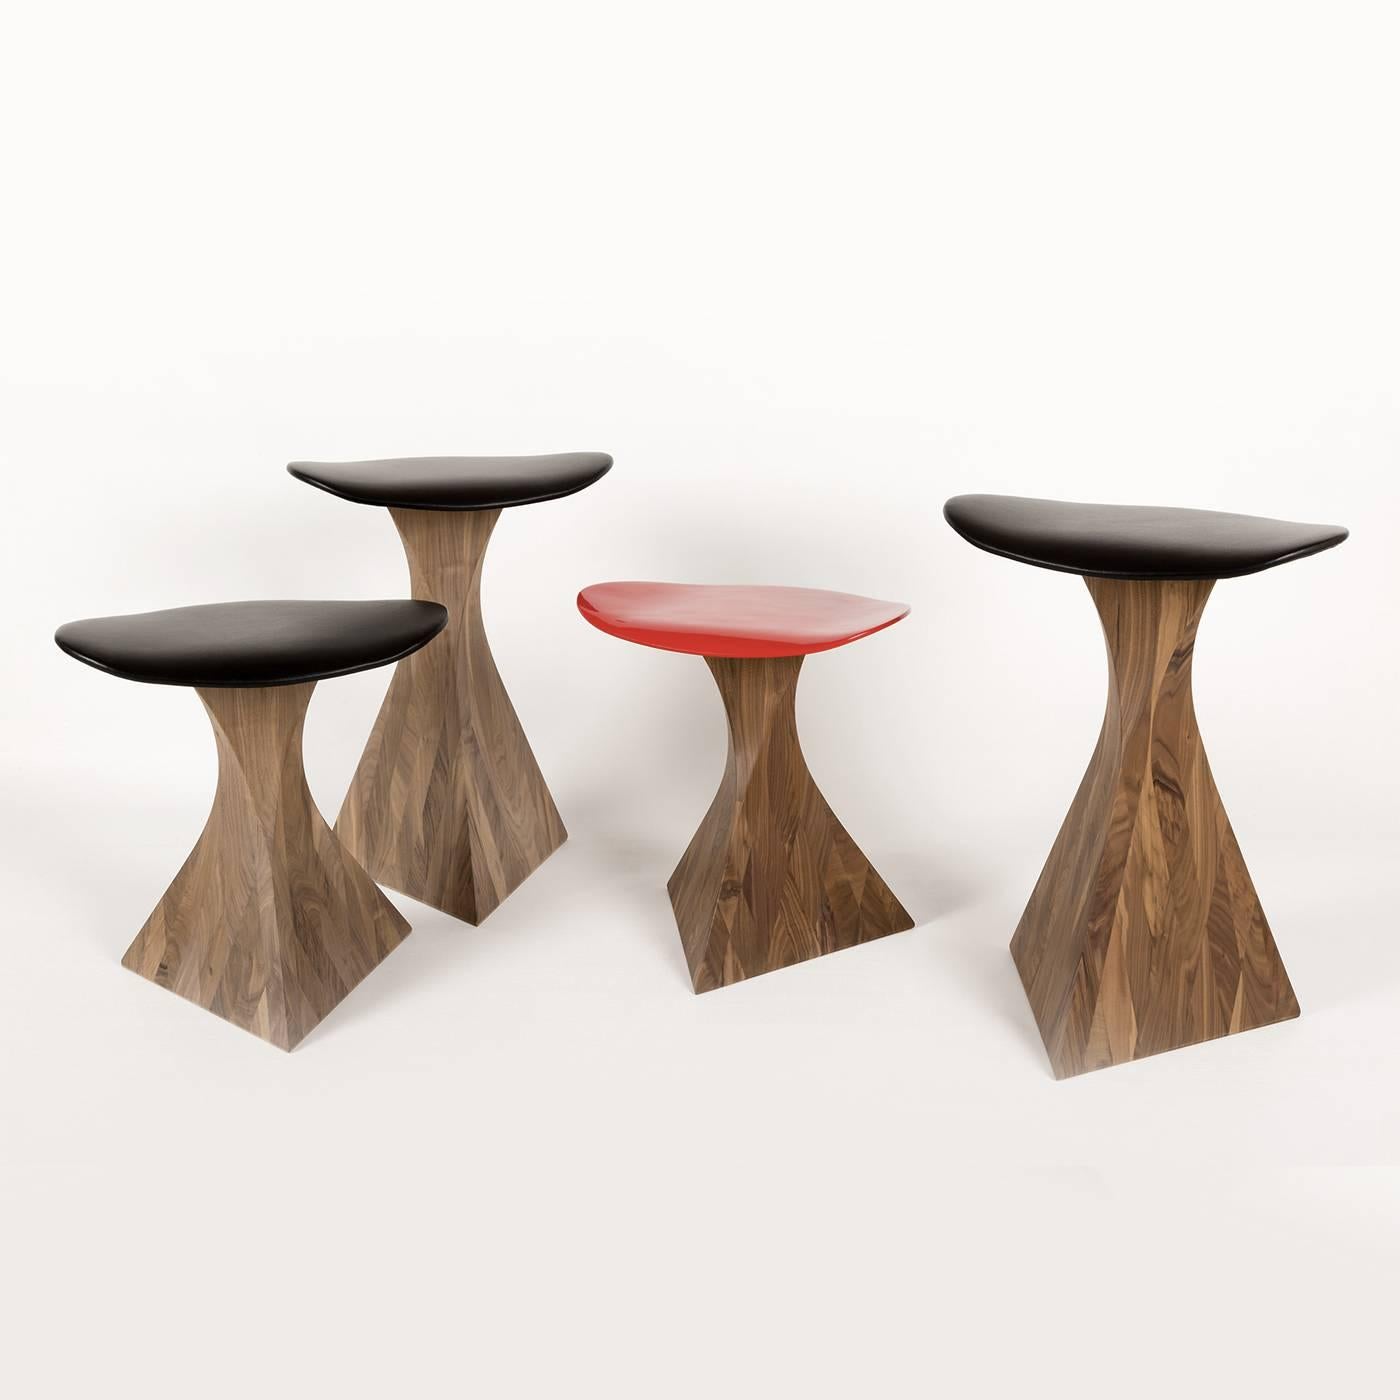 Italian Audrey Red Stool by Mauro Dell'Orco